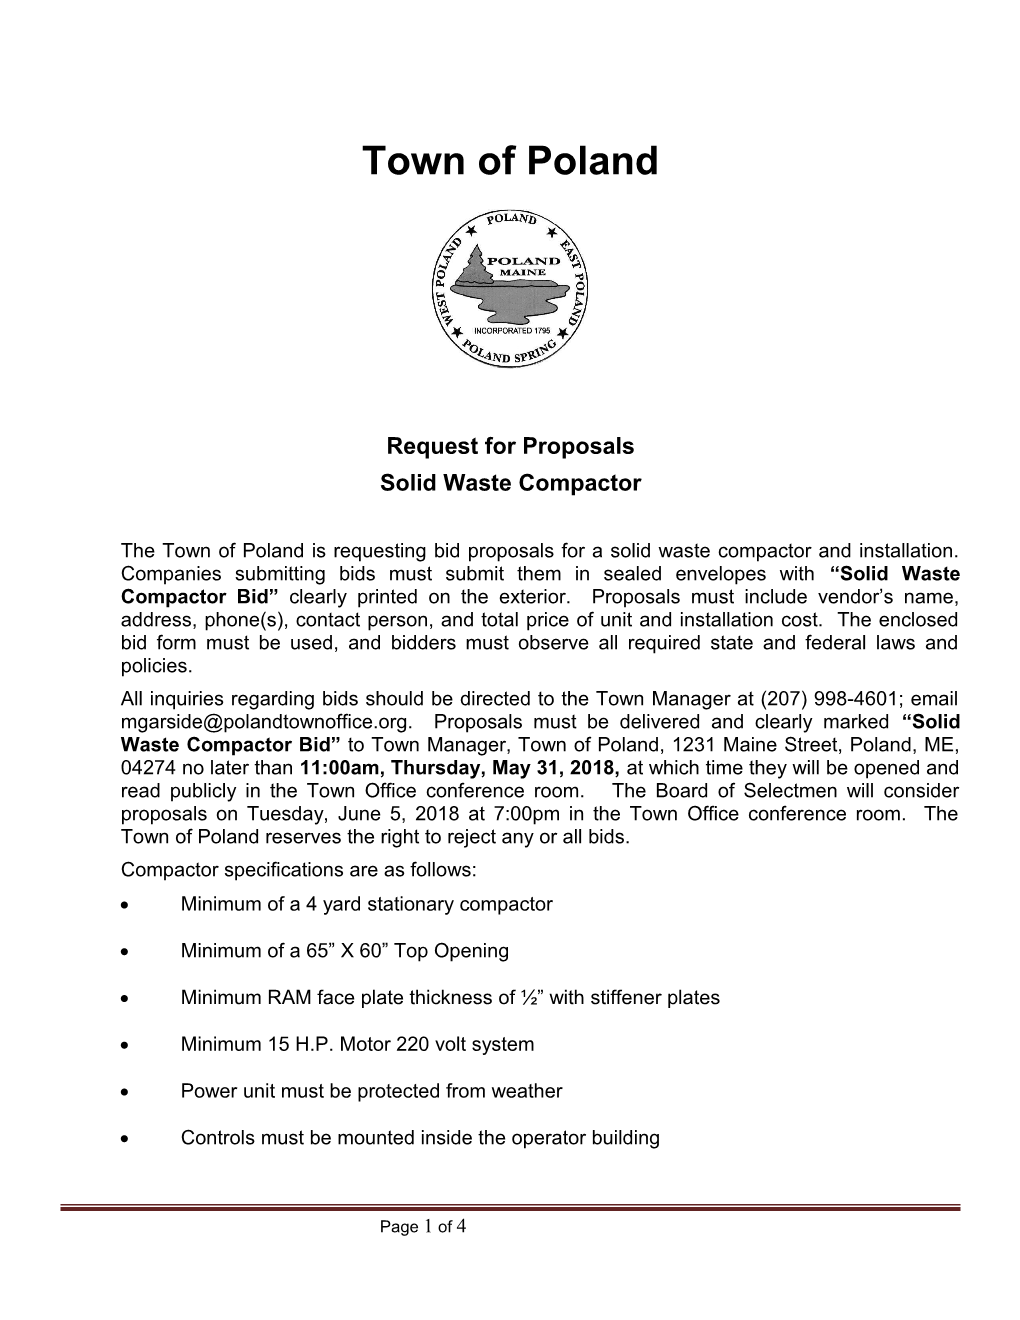 Town of Poland 2014 Solid Waste Compactor RFP